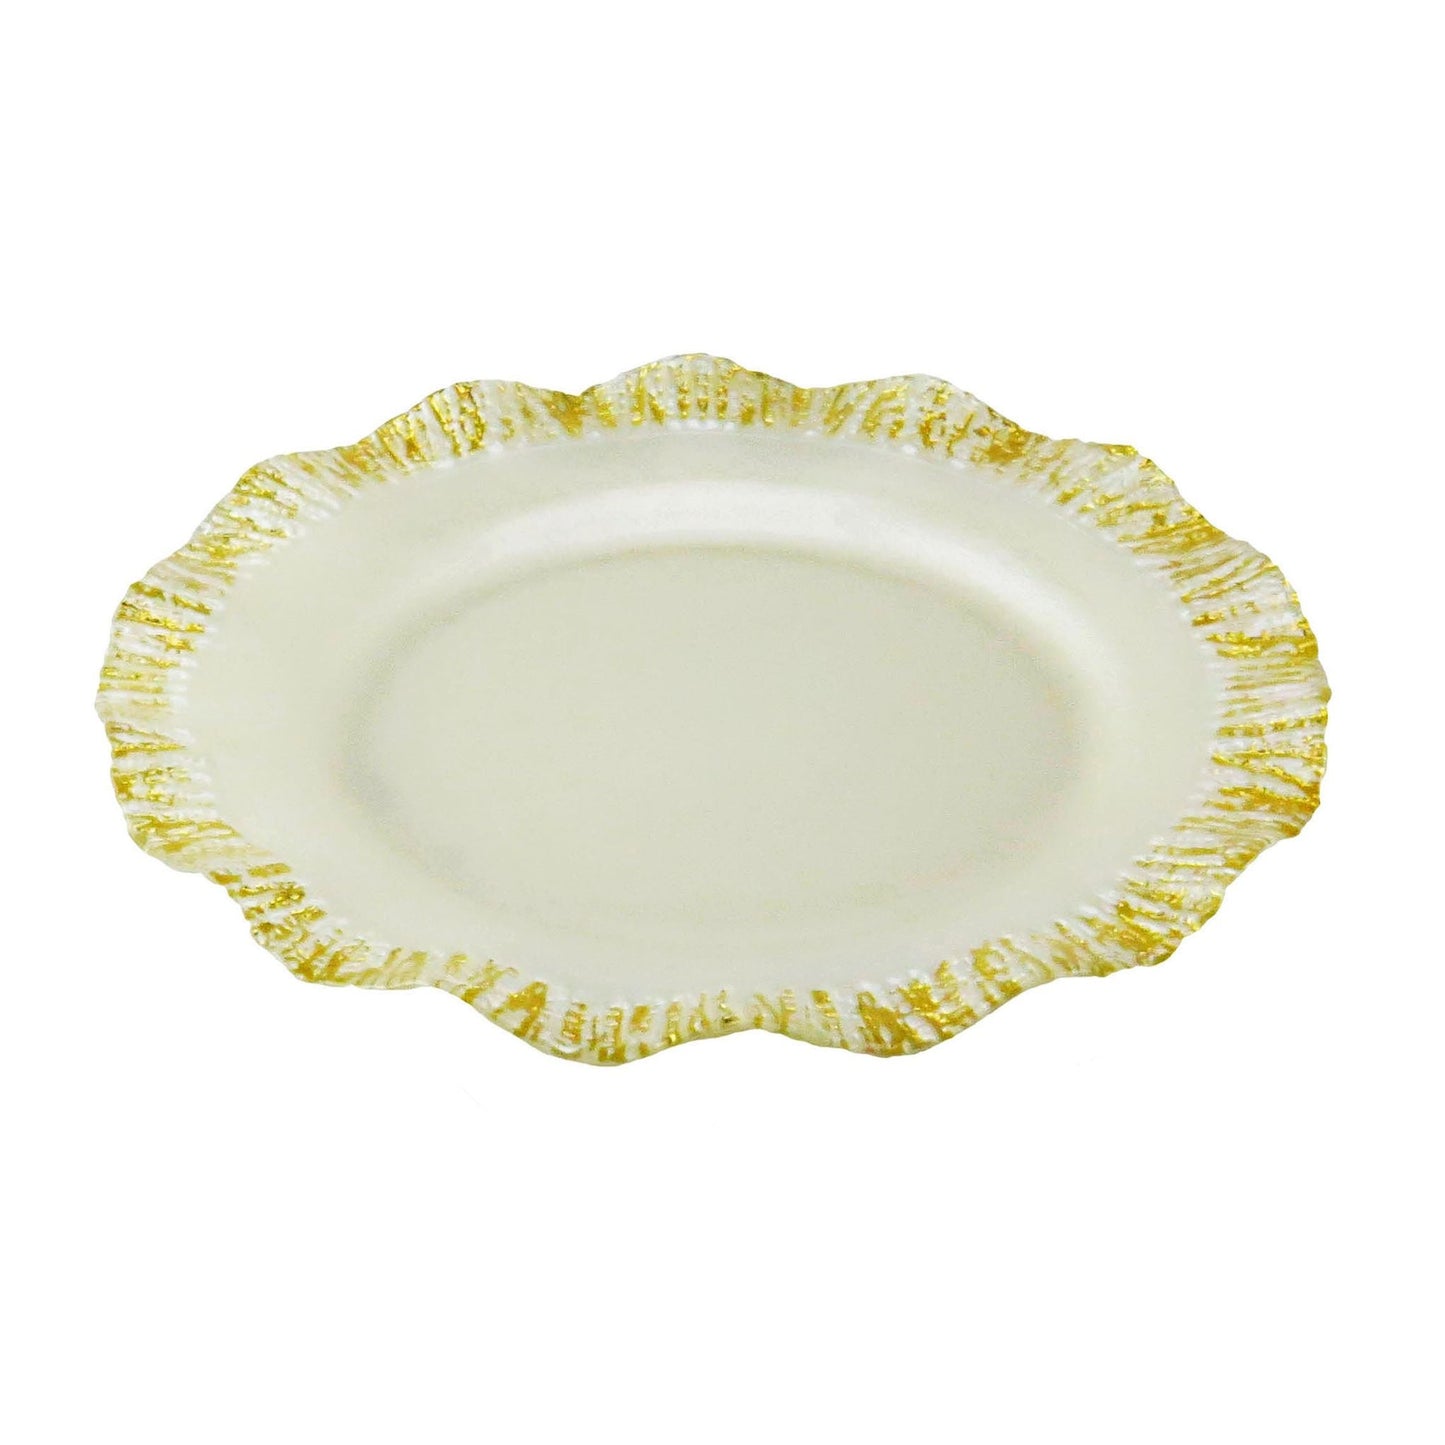 Classic Touch Set Of 4 Pearlized Milky Chargers Scalloped Gold Border, 13"